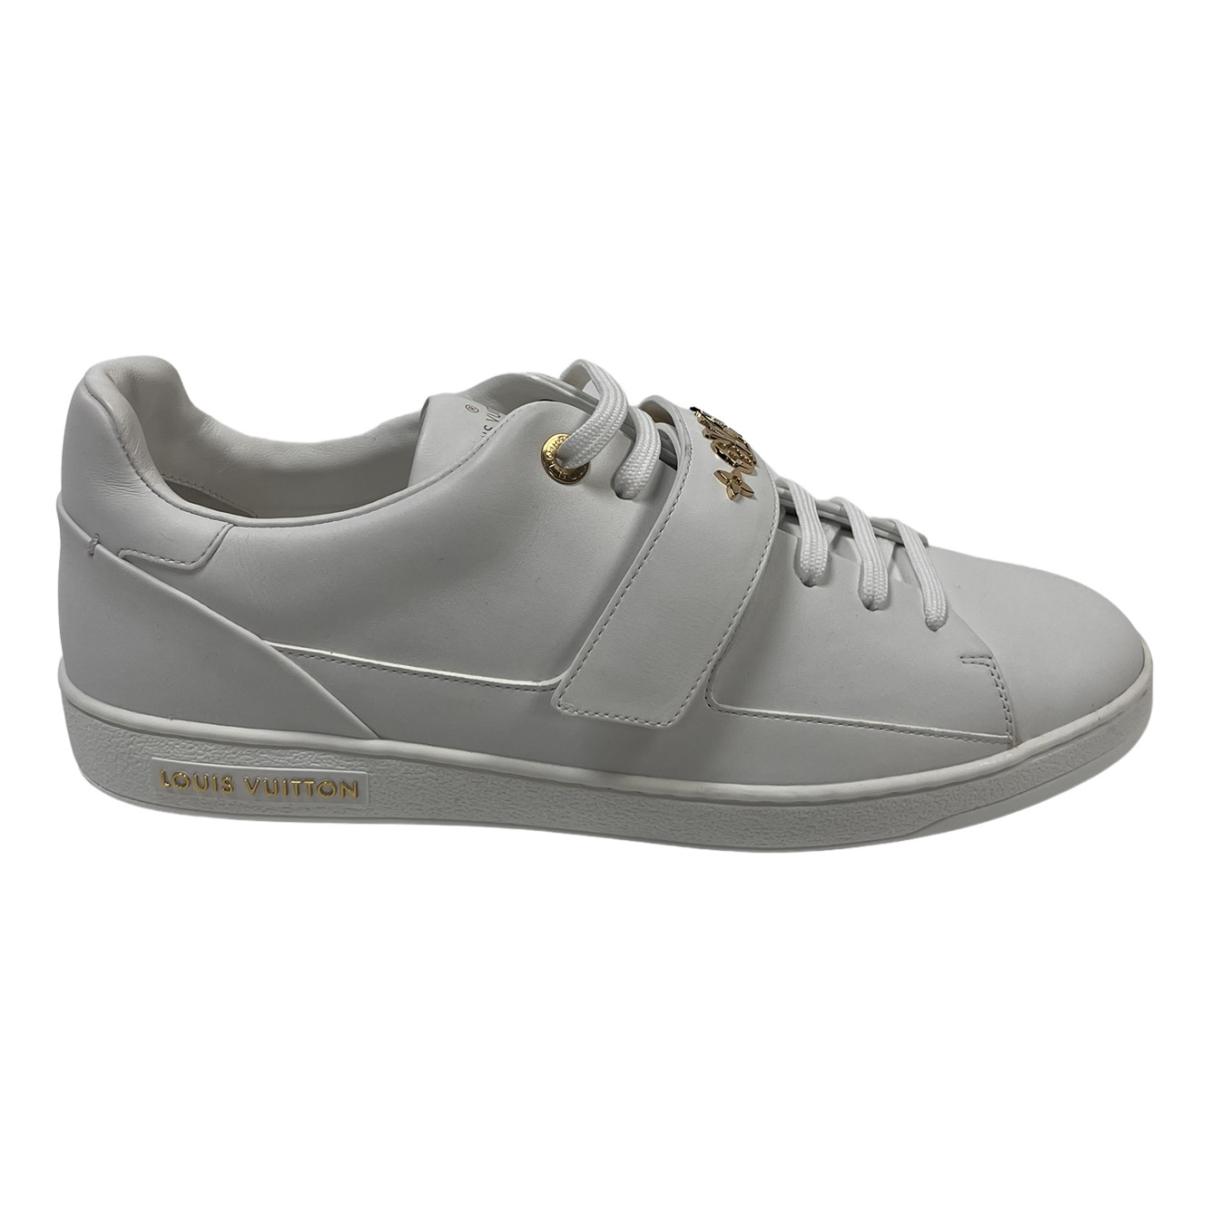 Louis Vuitton - Authenticated FRONTROW Trainer - Leather White Plain for Women, Very Good Condition